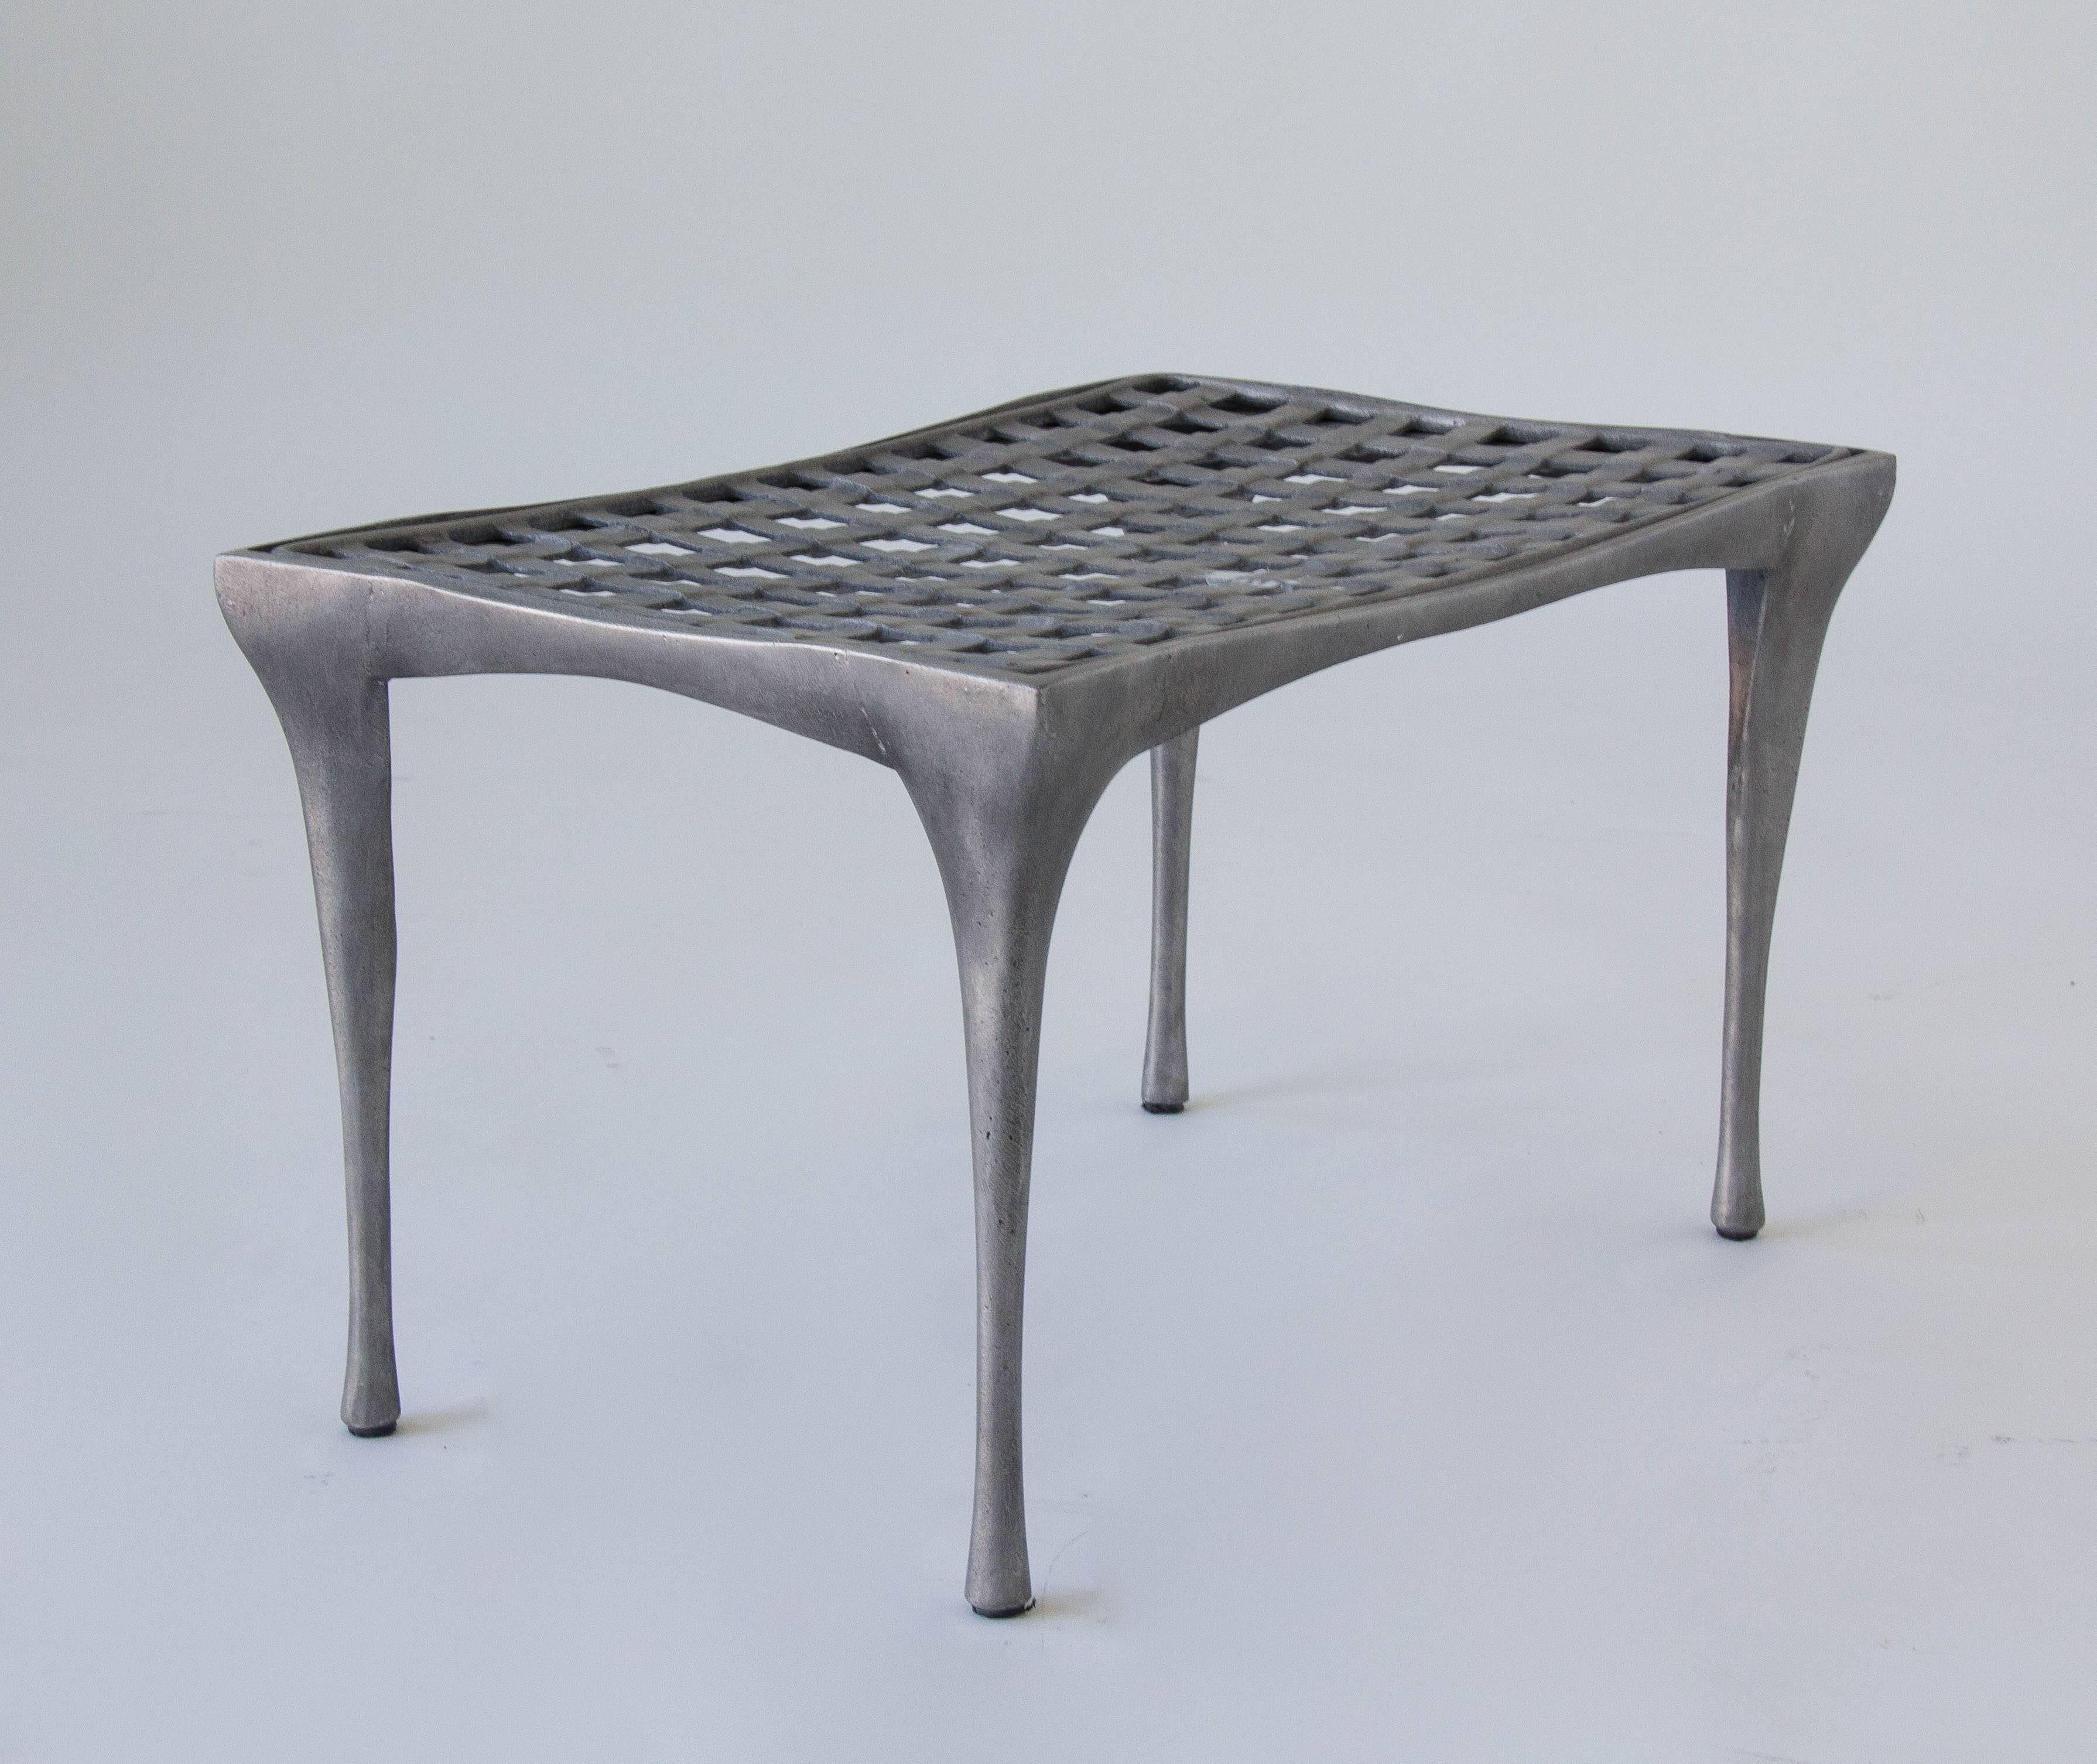 Designed by Dan Johnson and produced by Brown Jordan, this ottoman is cast in aluminum with a “woven